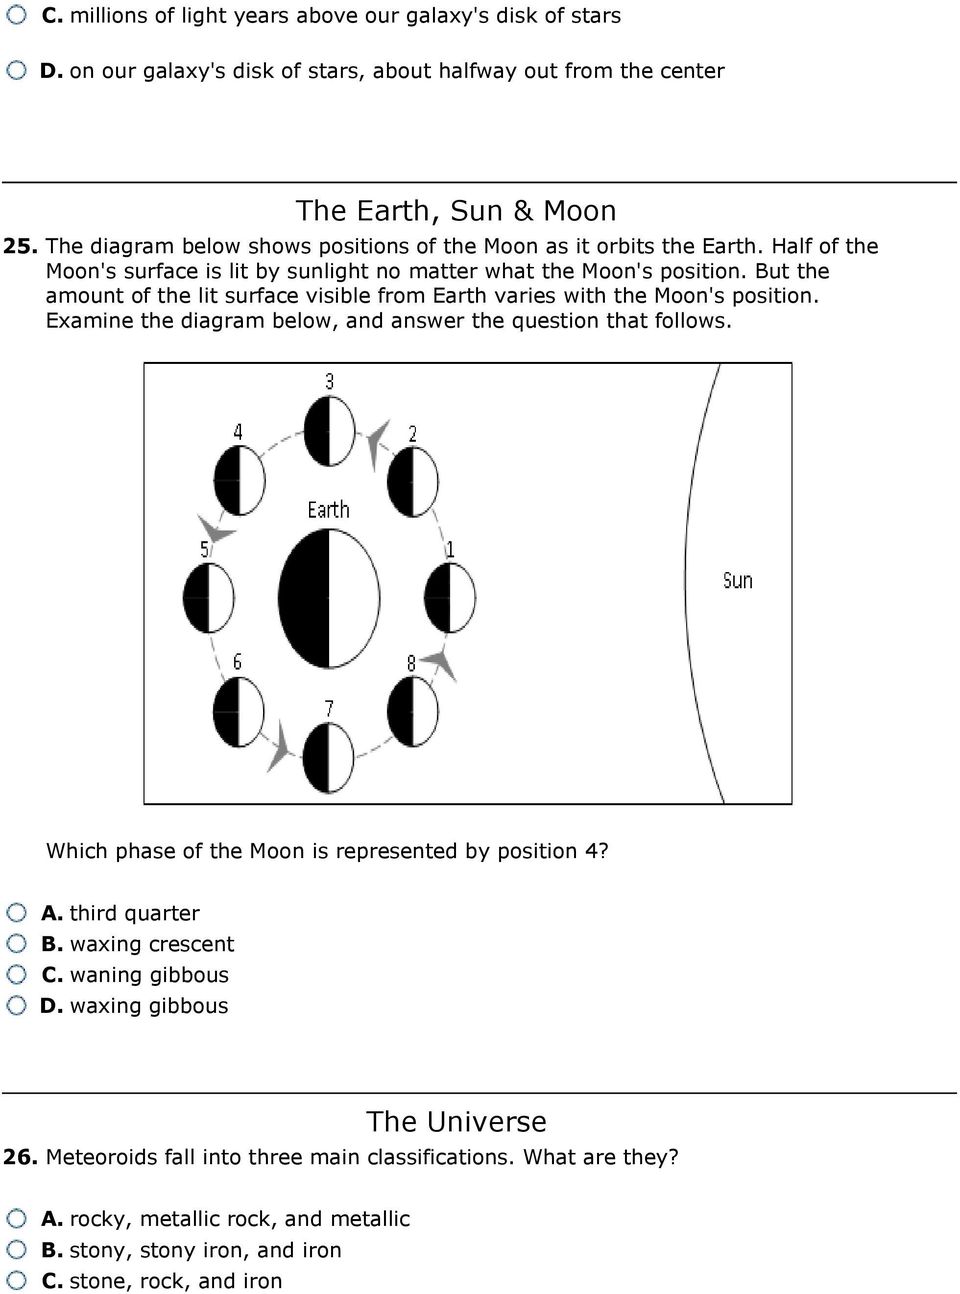 But the amount of the lit surface visible from Earth varies with the Moon's position. Examine the diagram below, and answer the question that follows.